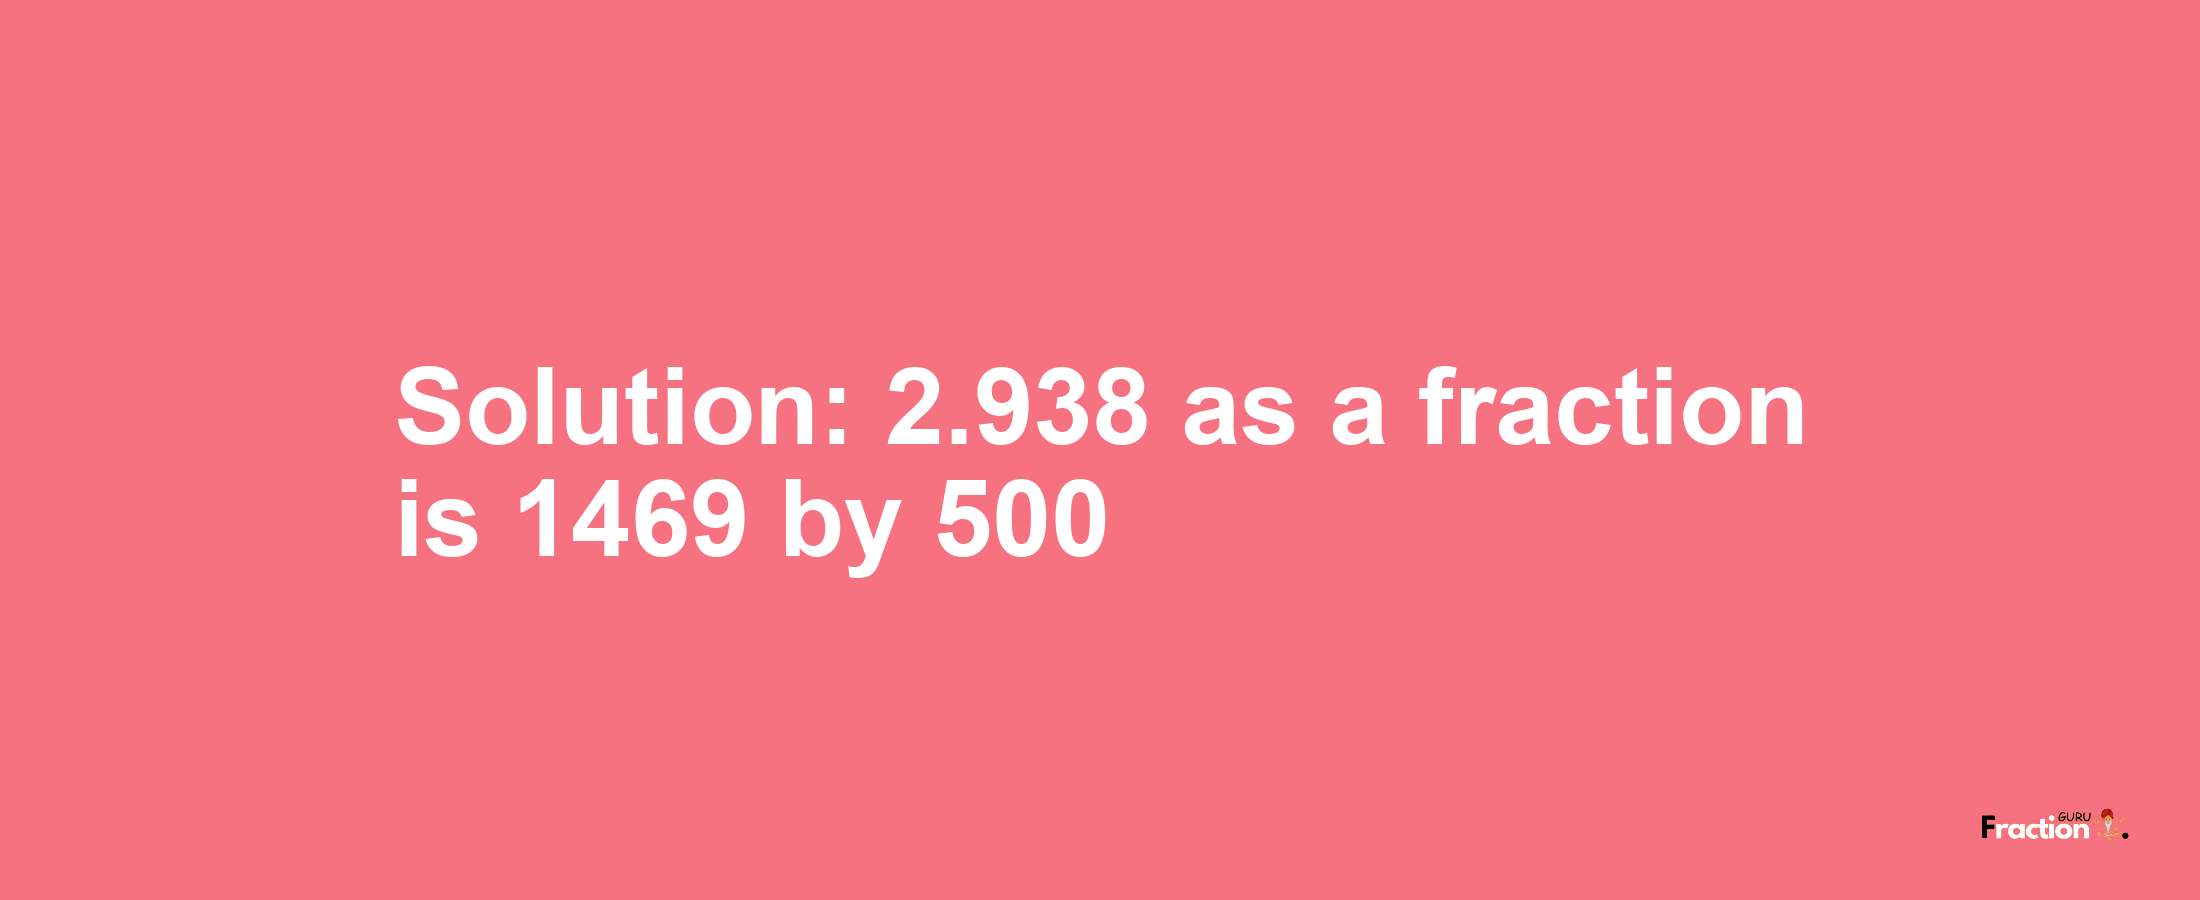 Solution:2.938 as a fraction is 1469/500